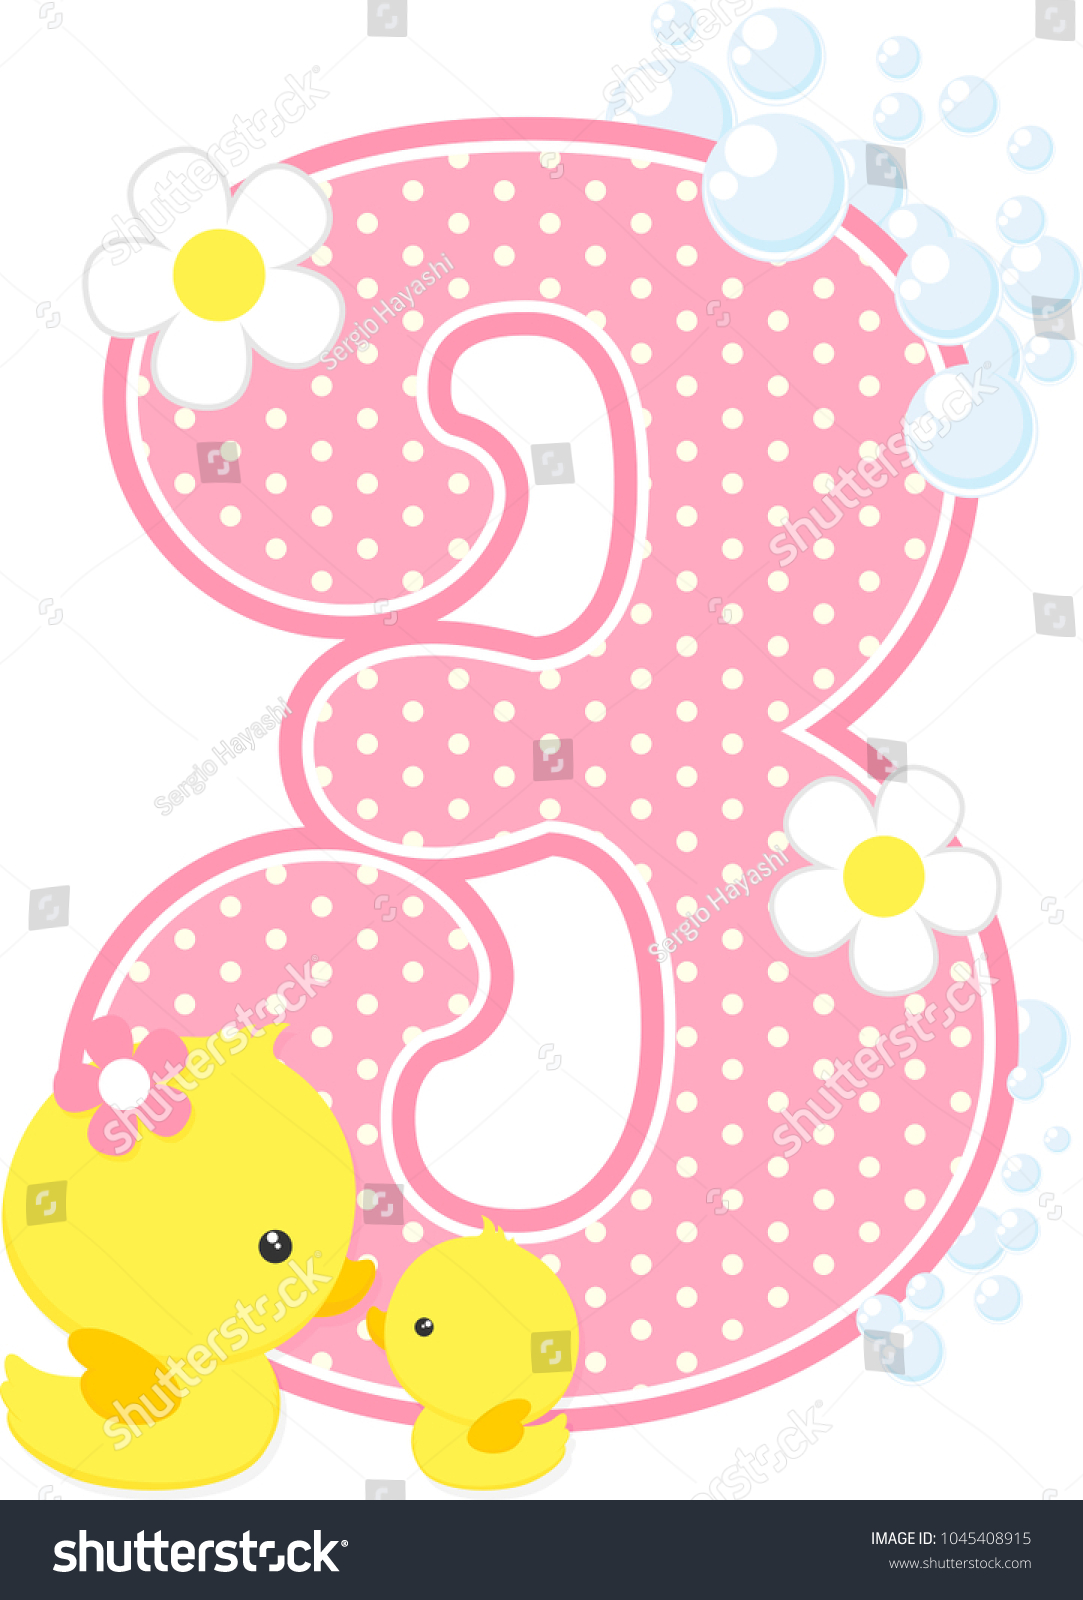 Number 3 Bubbles Cute Rubber Duck Stock Vector Royalty Free 1045408915